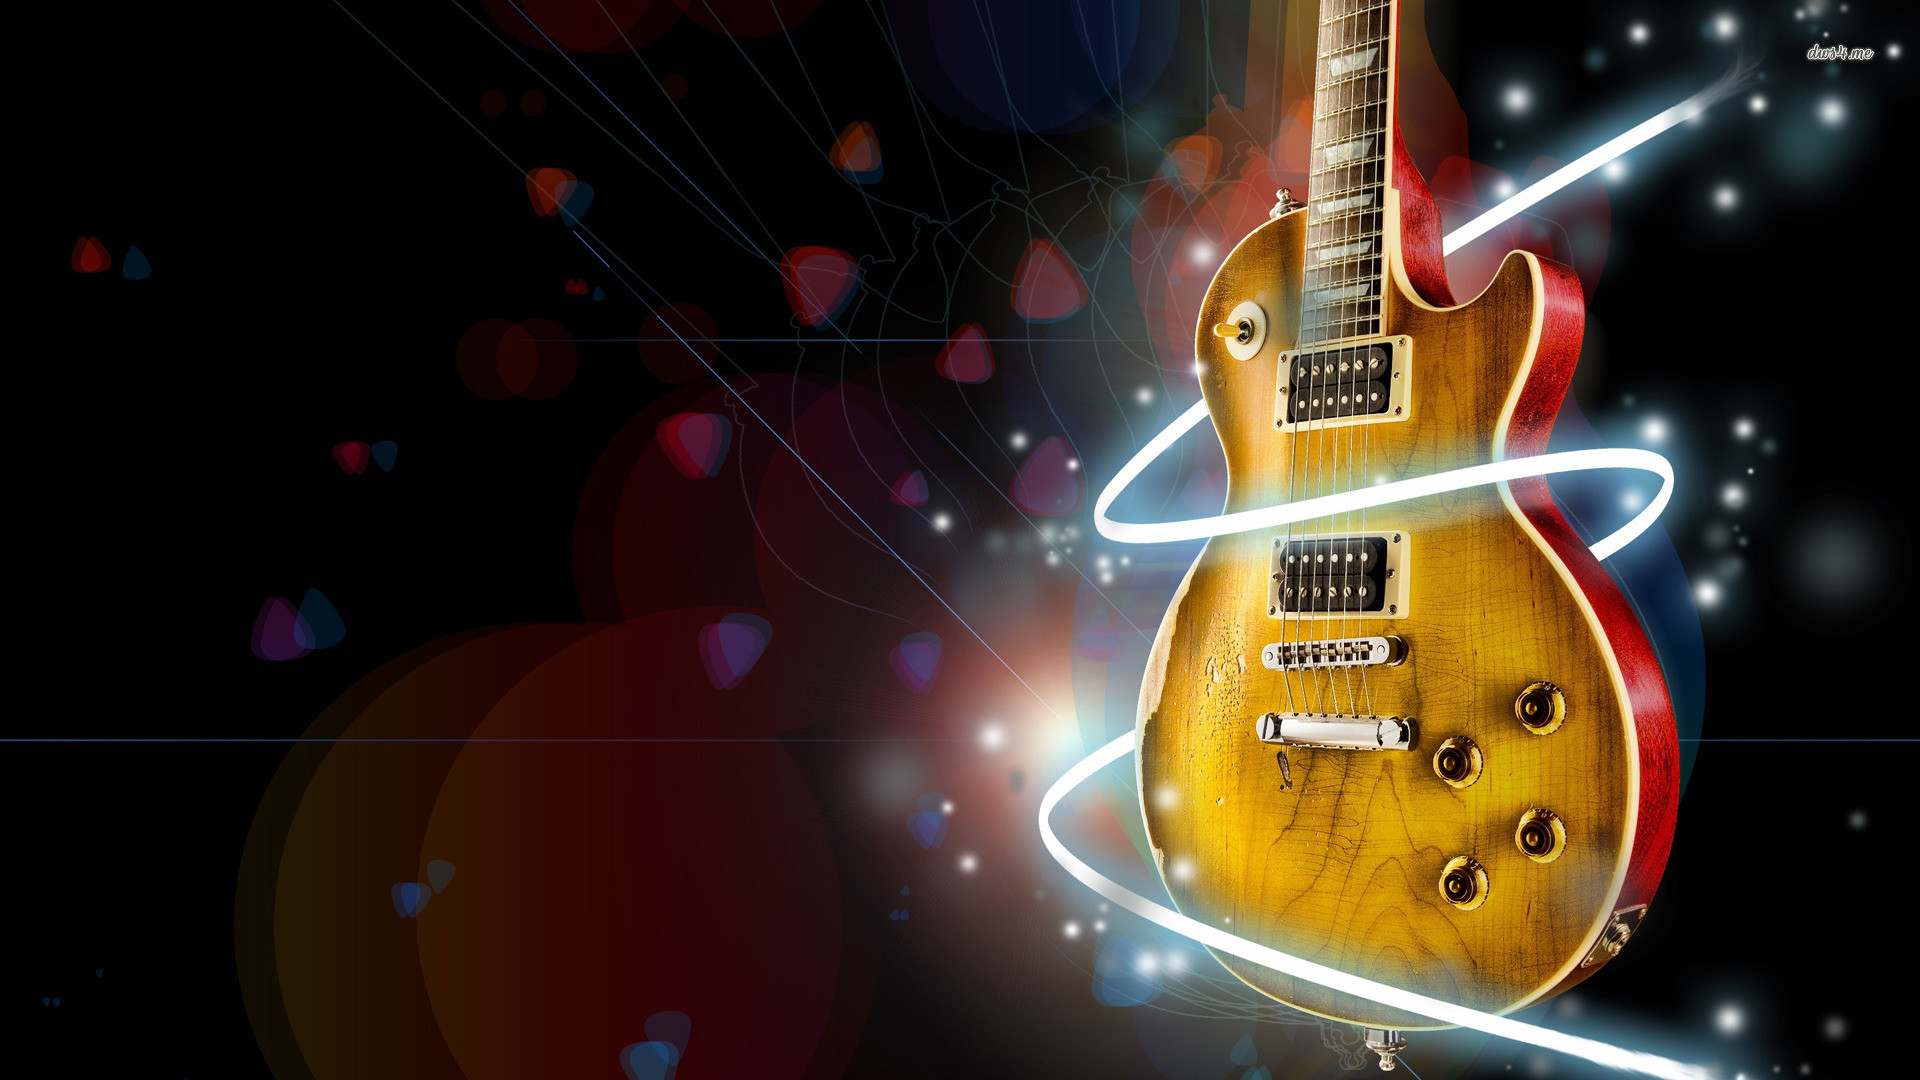 Rock Music Wallpapers 64 Images